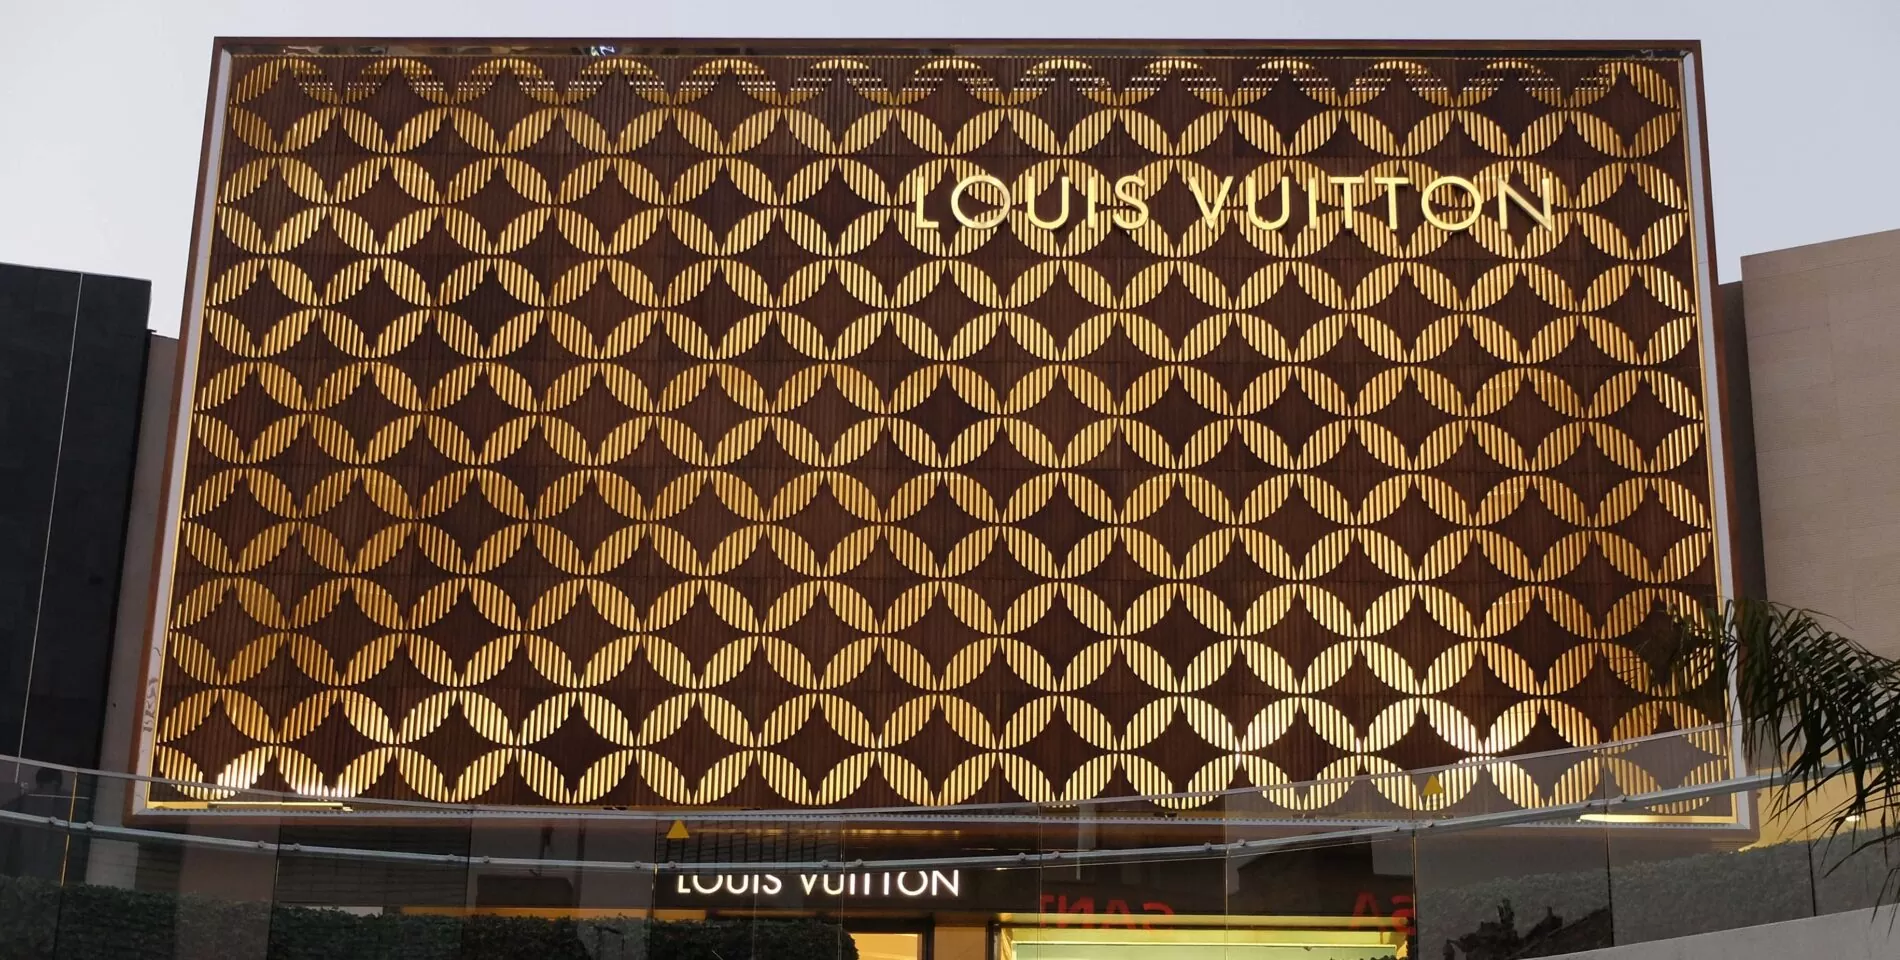 Rugged Wholesale louis vuitton fabric For Clothing And Accessories